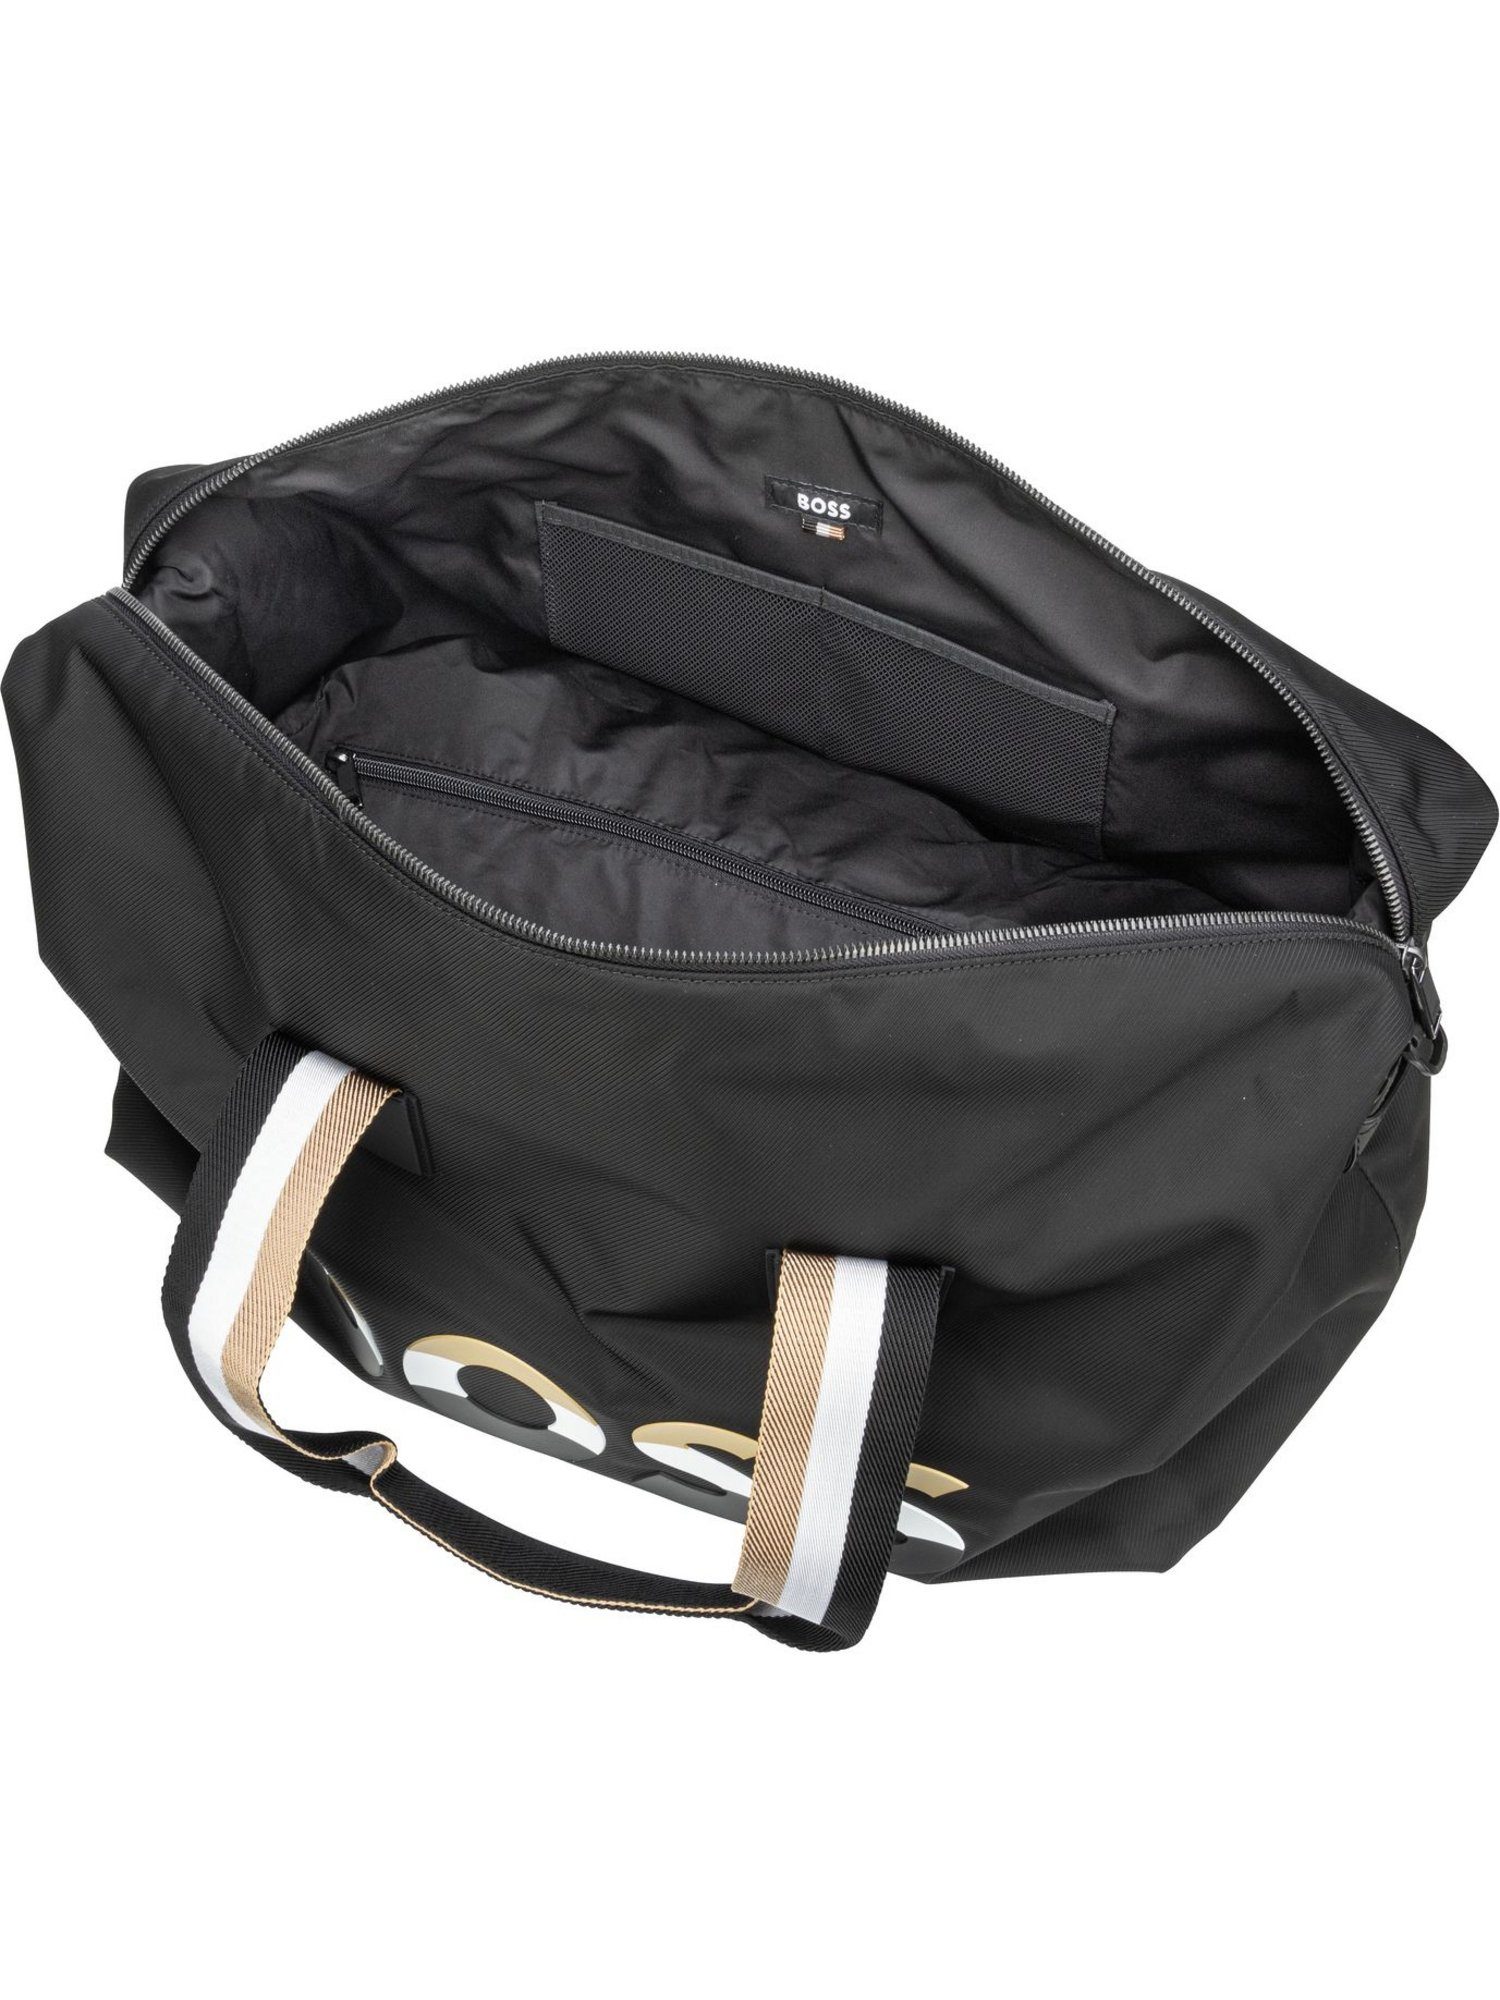 Weekender Catch 2.0I BOSS Holdall